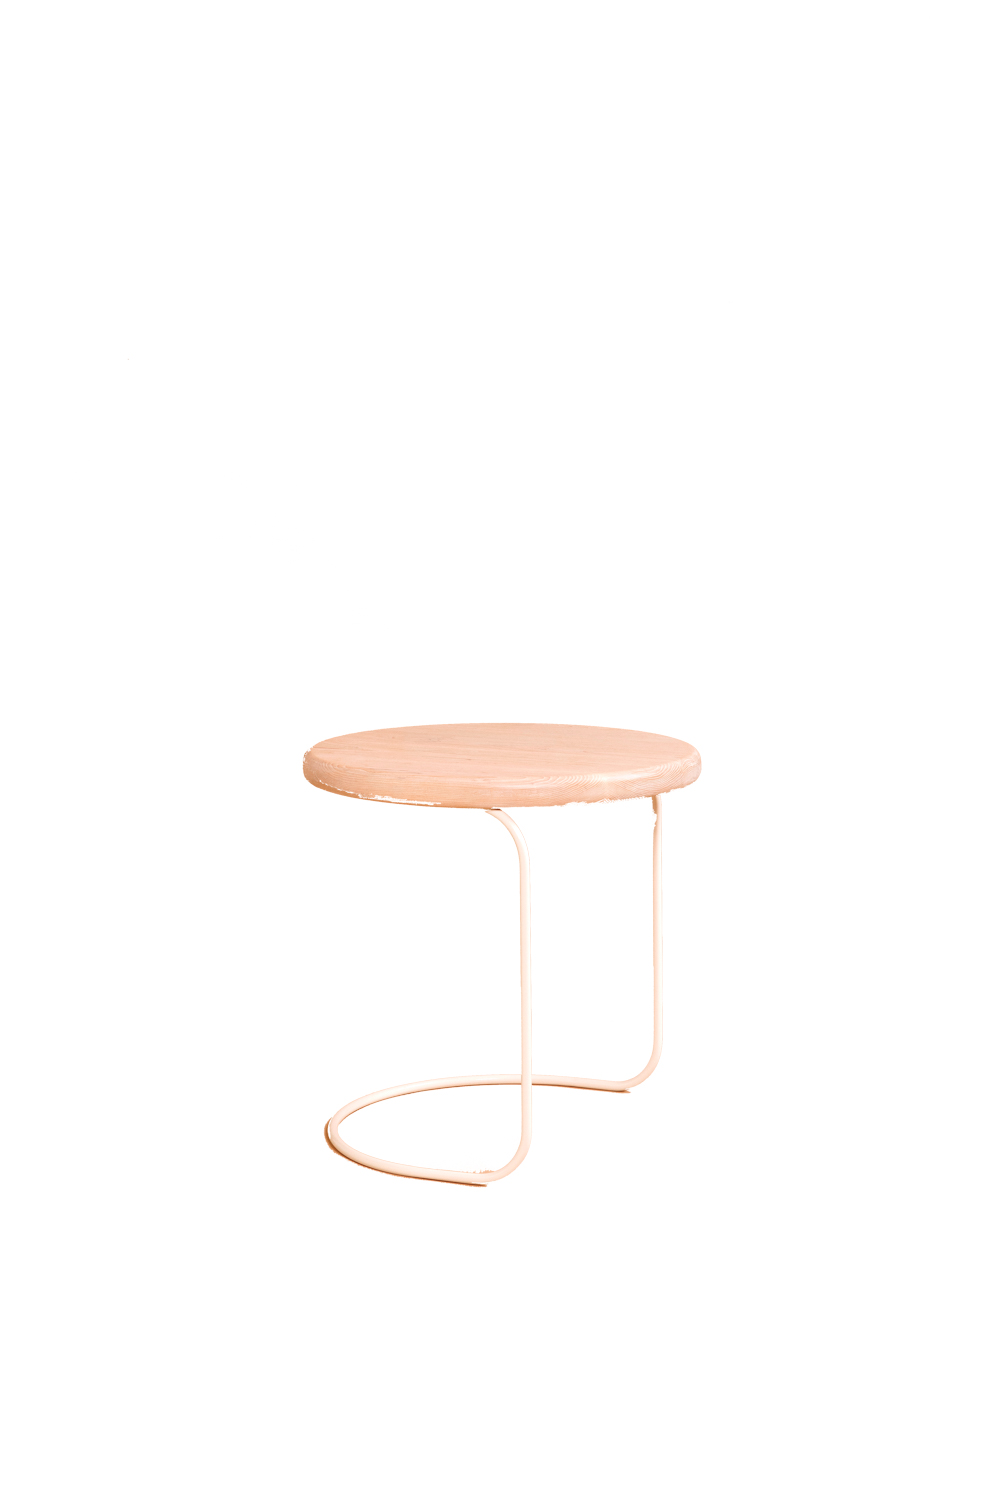 occasional tables with natural material and soft form by Lauren Hackett